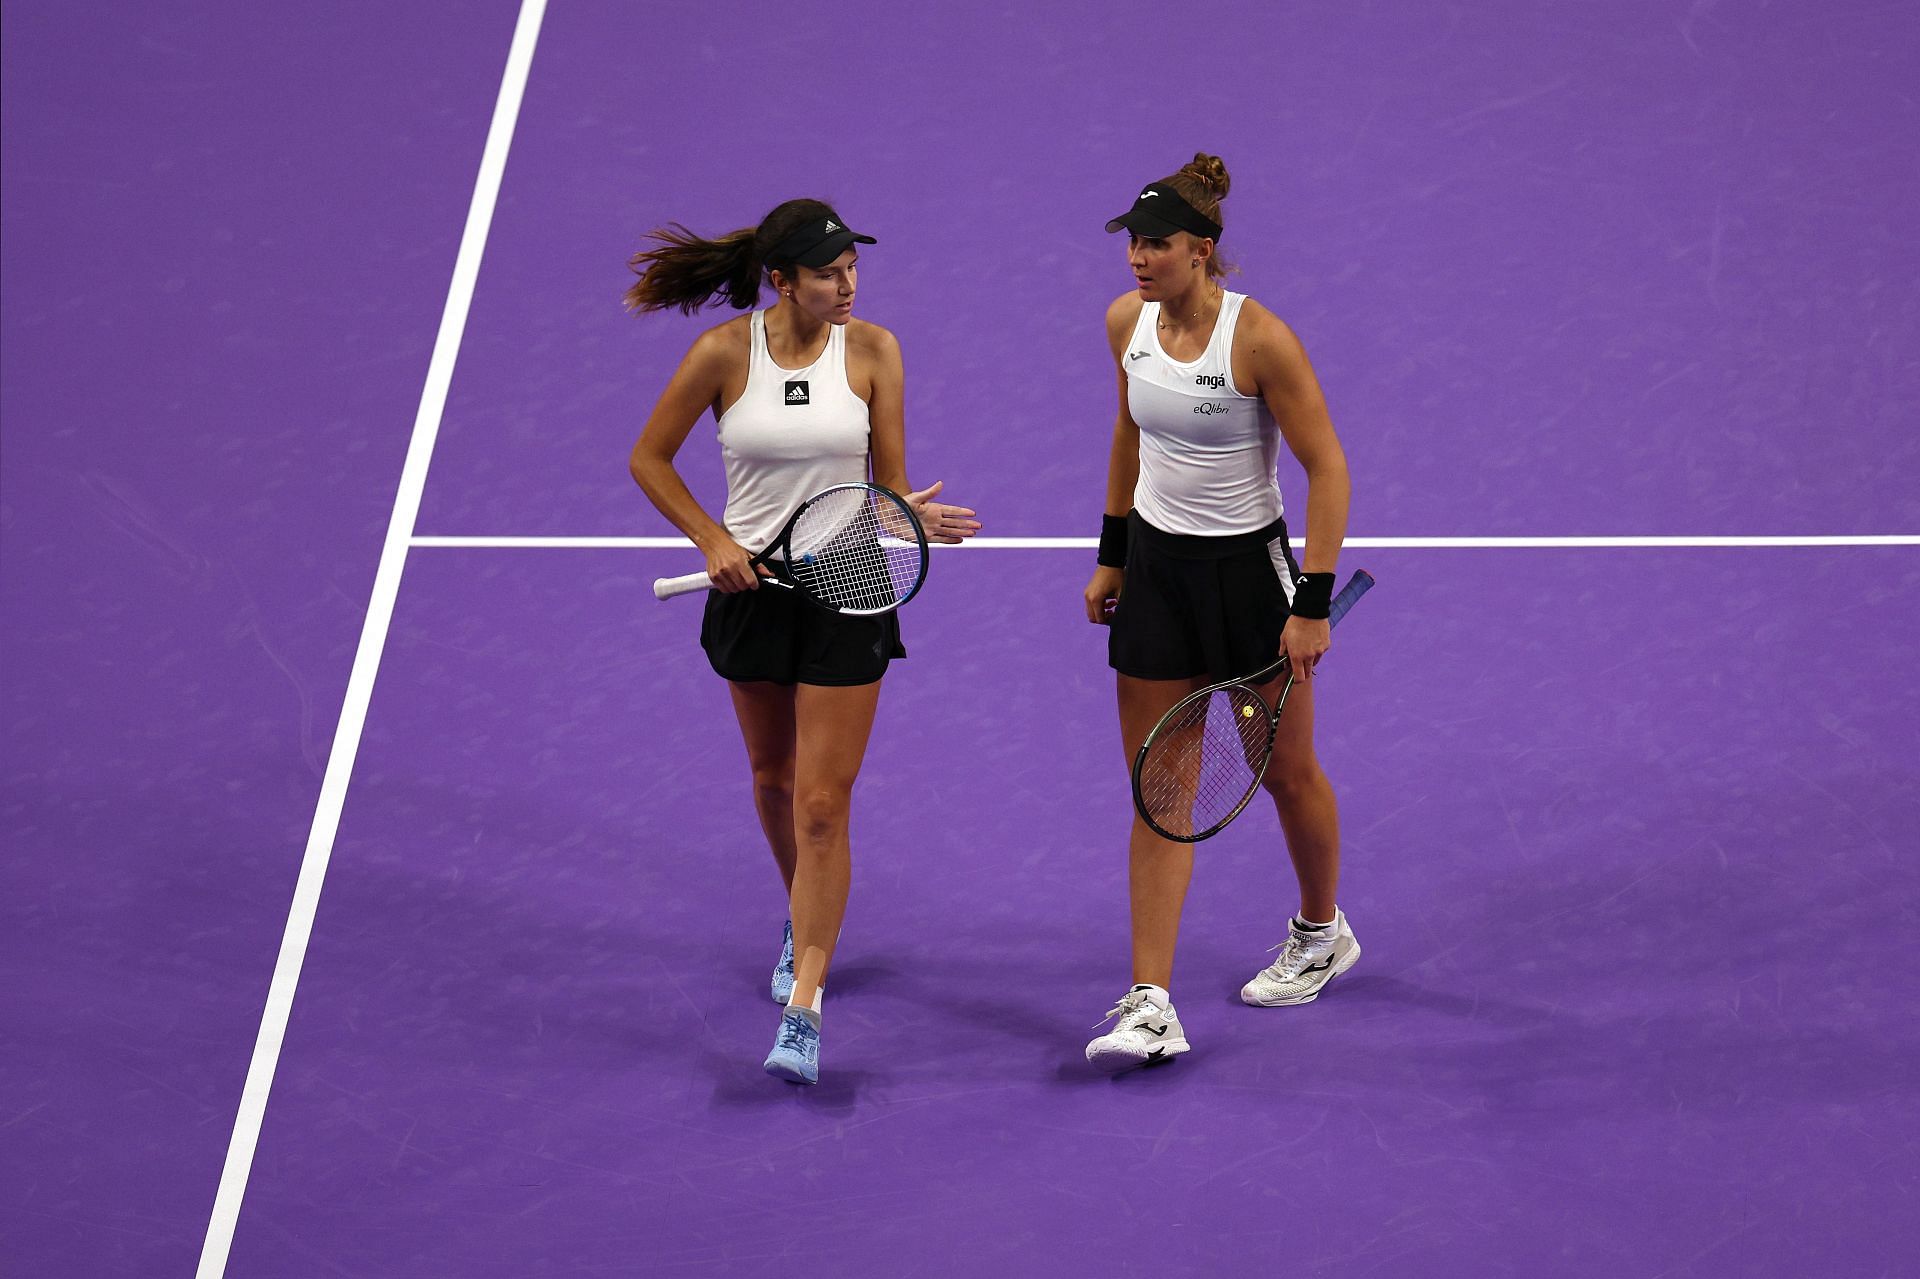 WTA Finals 2022 Schedule Today TV Schedule, start time, order of play, live stream details and more Day 6